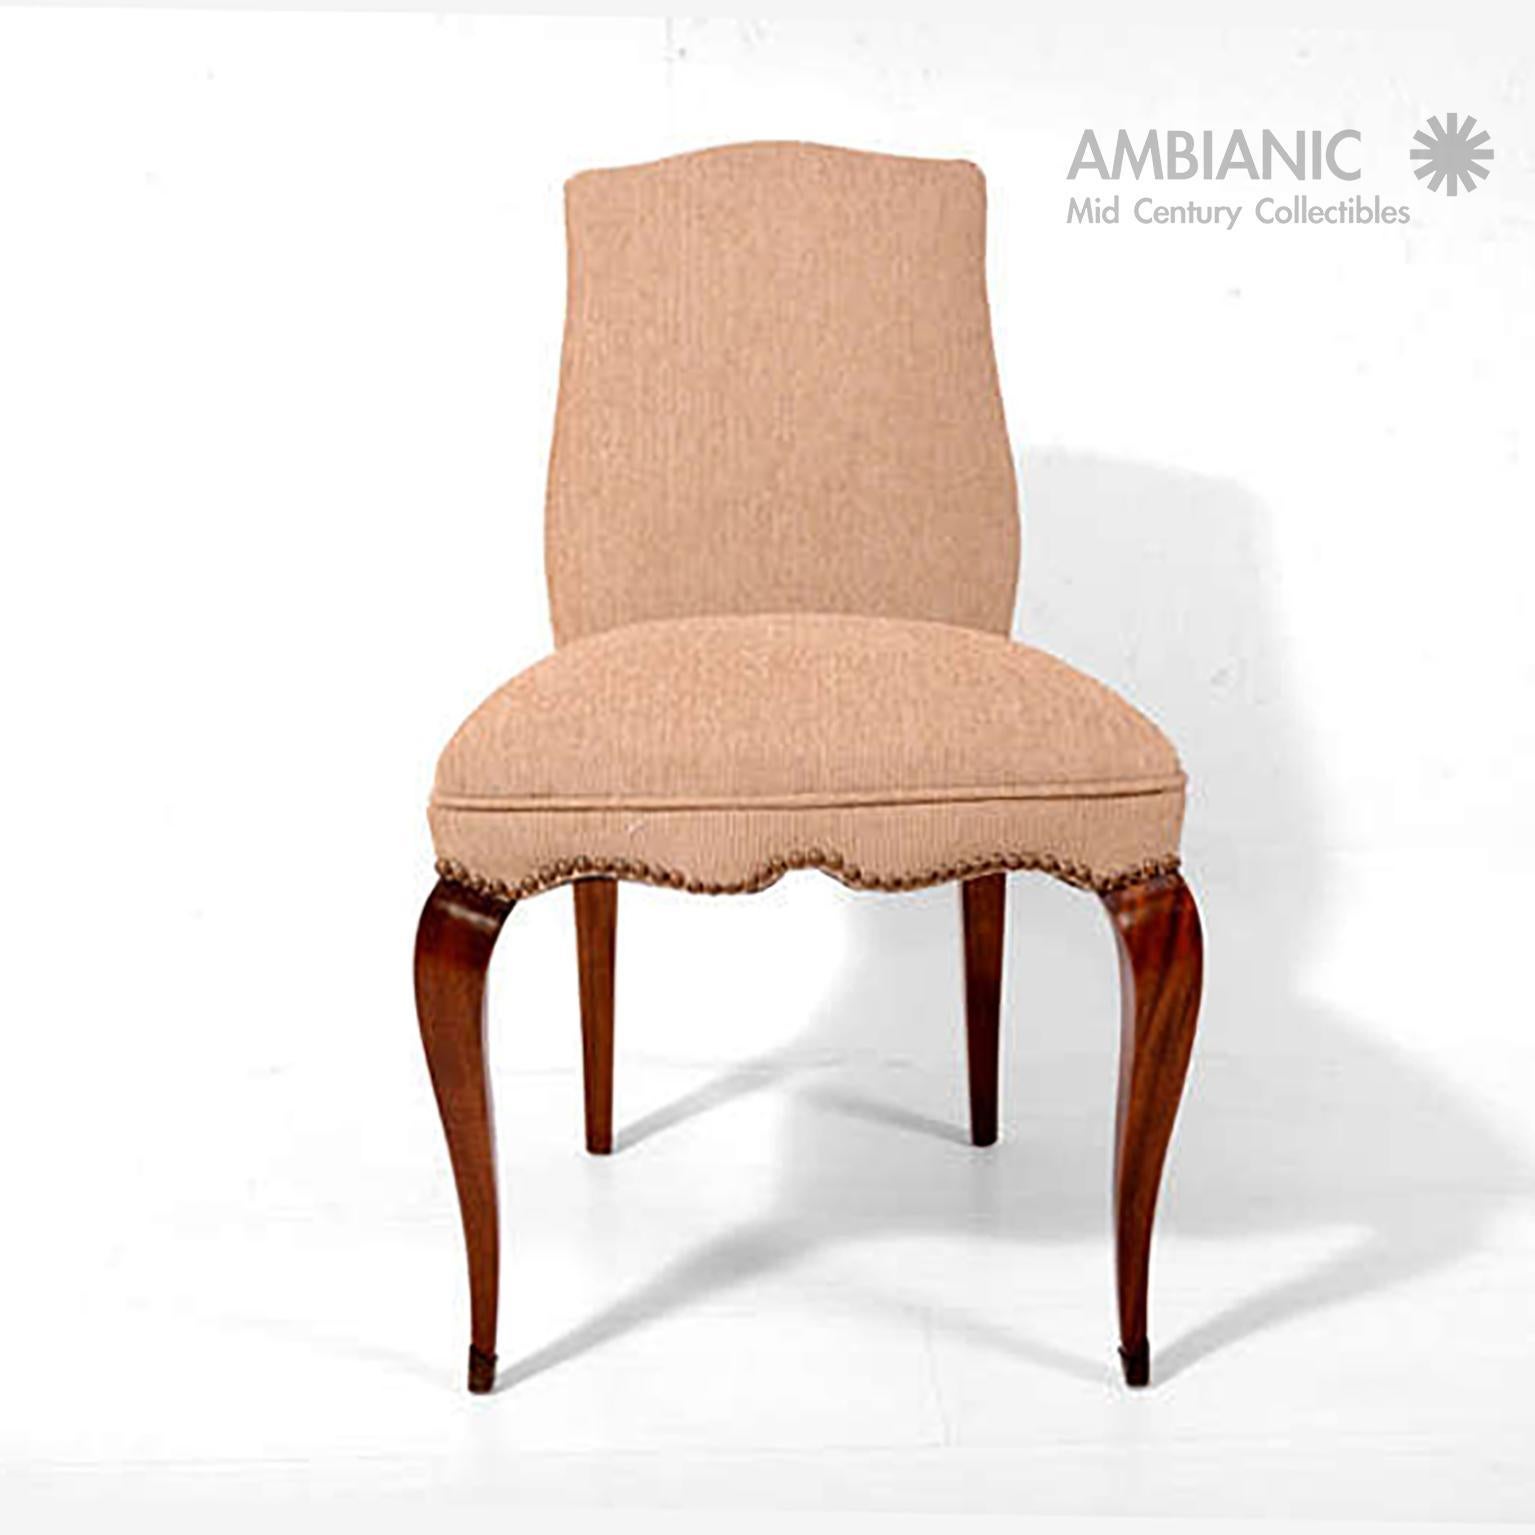 We are pleased to offer for your consideration a wonderful set of four (4) dining chairs, design attributed to Arturo Pani. Made in Mexico circa the late 1940s.

Neoclassical lines, constructed with mahogany wood. Upholstery in light brown